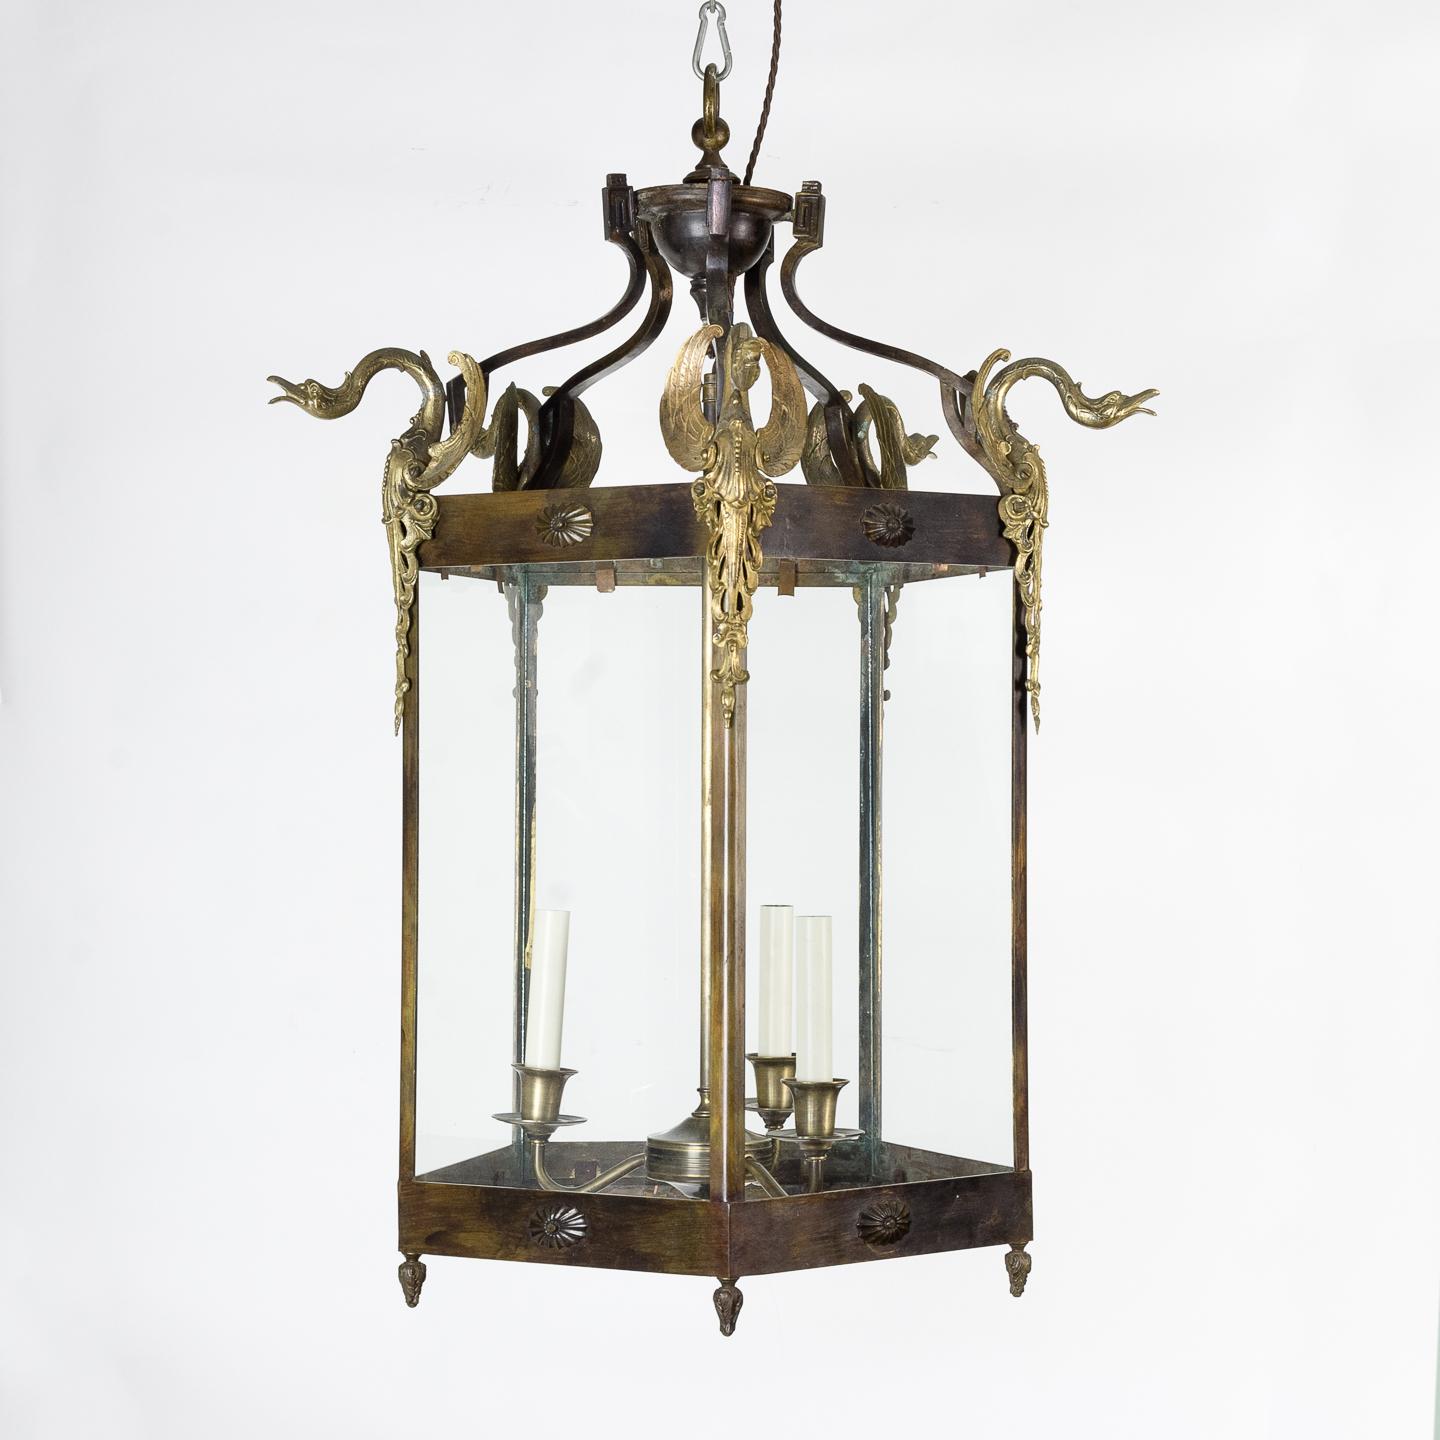 19th century French Empire style hall lantern, of pentagonal form with gilt swan mounts to each vertex and three-light suspended fitting within.